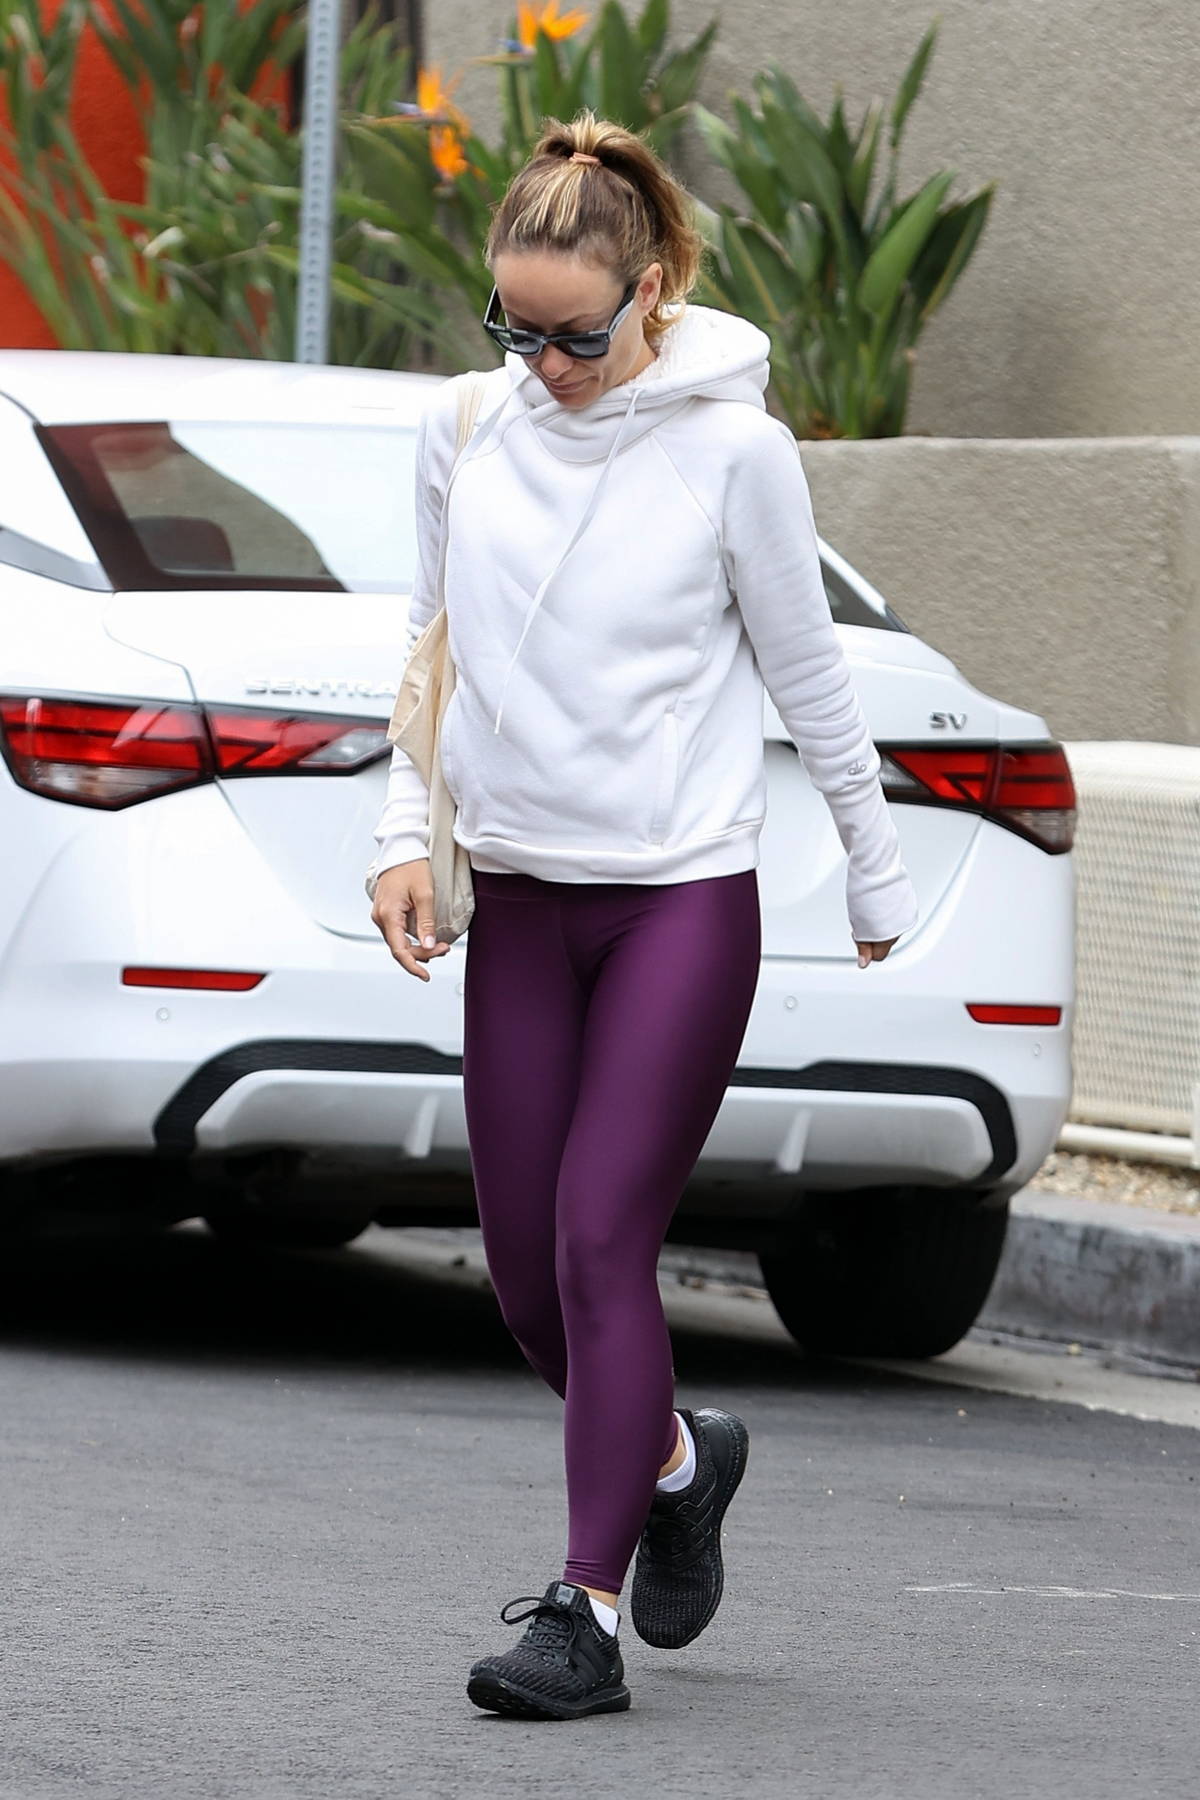 Olivia Wilde shows off her rock-hard abs in purple sports bra and